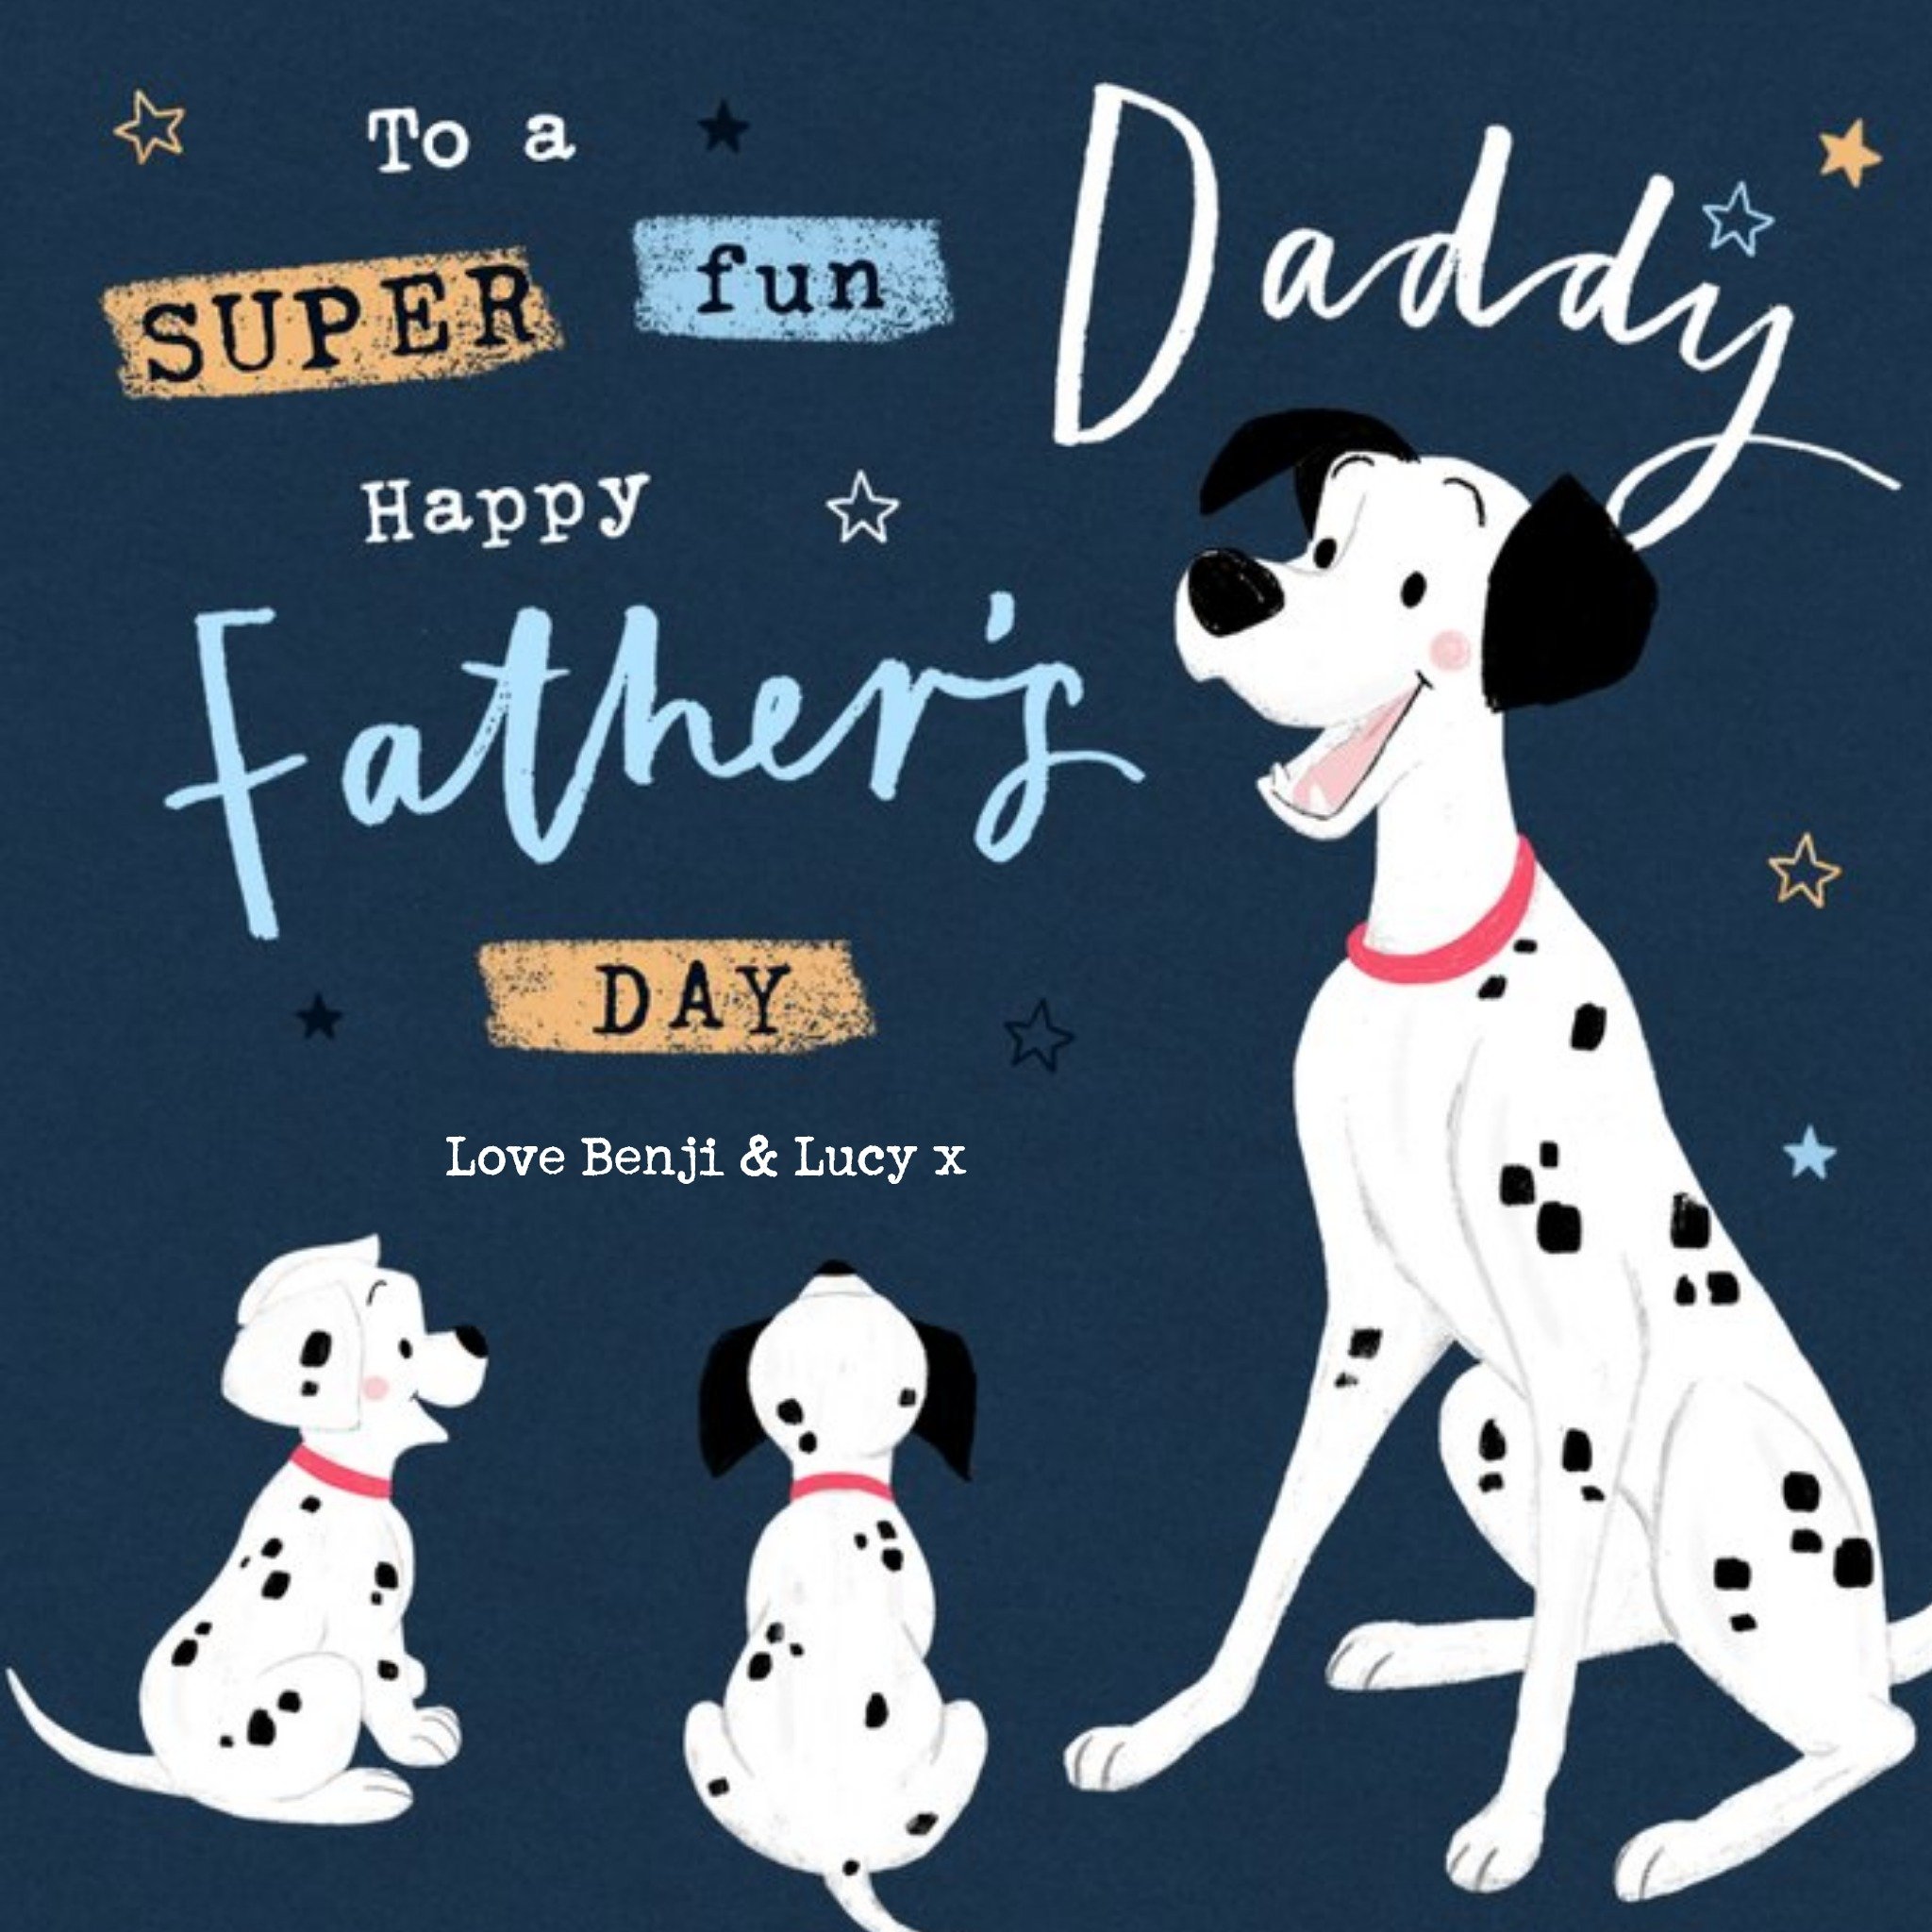 Super Fun Daddy Father's Day Card From The Kids - Disney 101 Dalmatians Illustration, Square